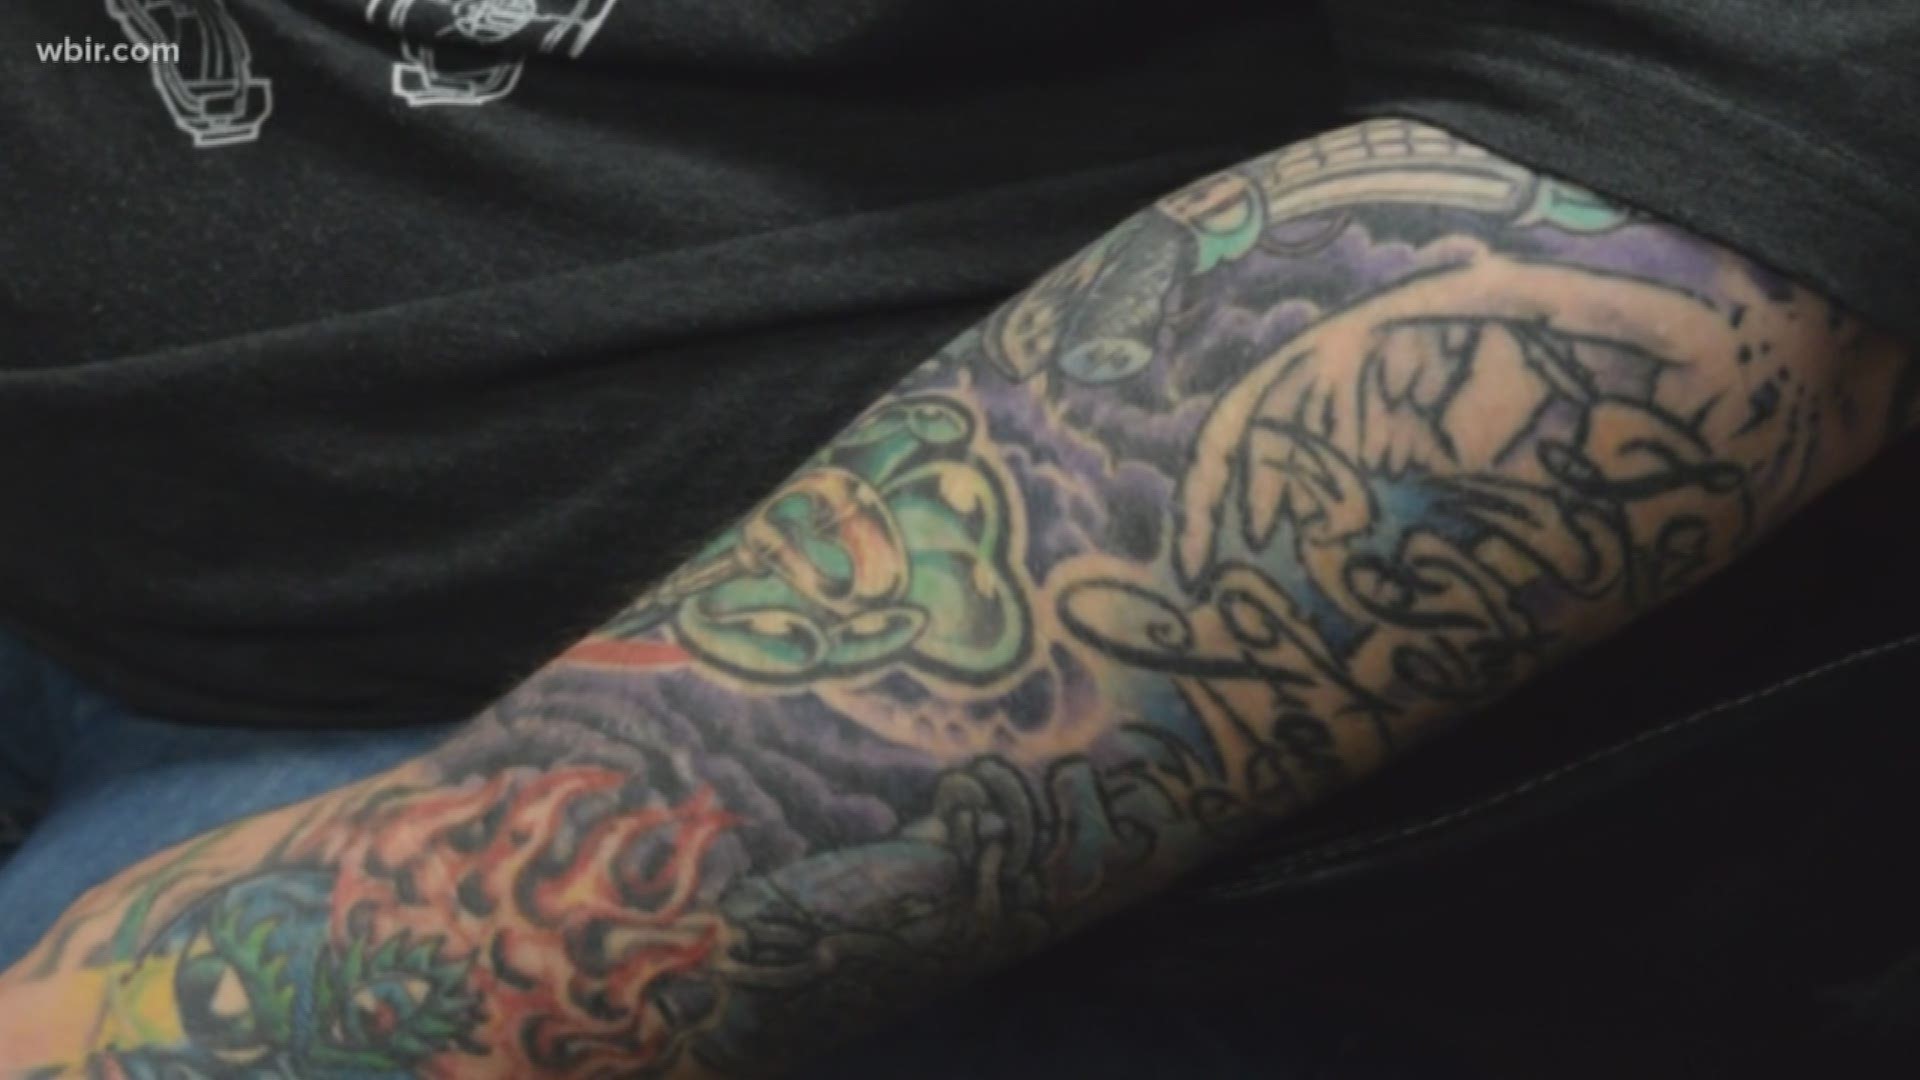 More millennials are getting tattoos, but does that mean employers are accepting them now?